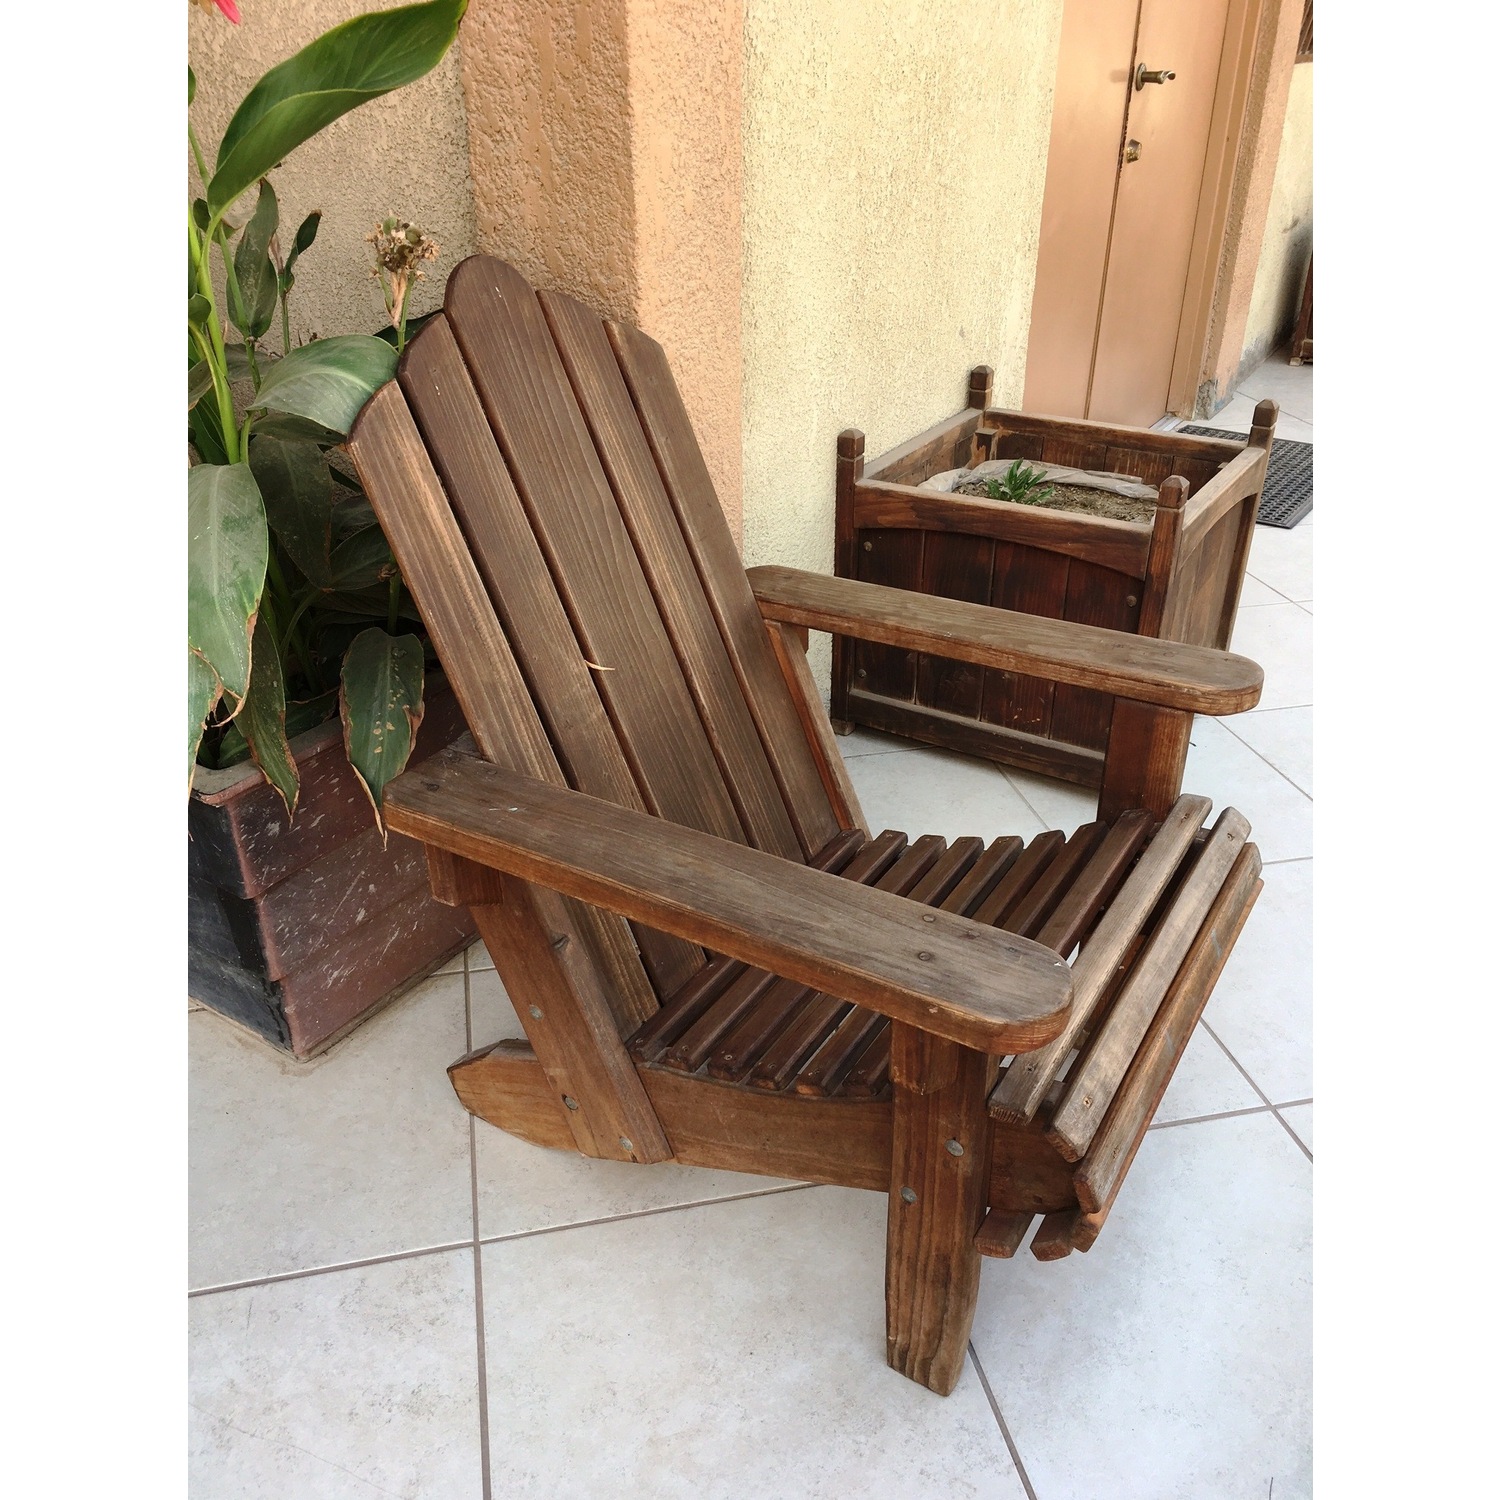 Best Redwood 36" Solid Wood Adirondack Chair in Mission Brown Stain - image 1 of 2